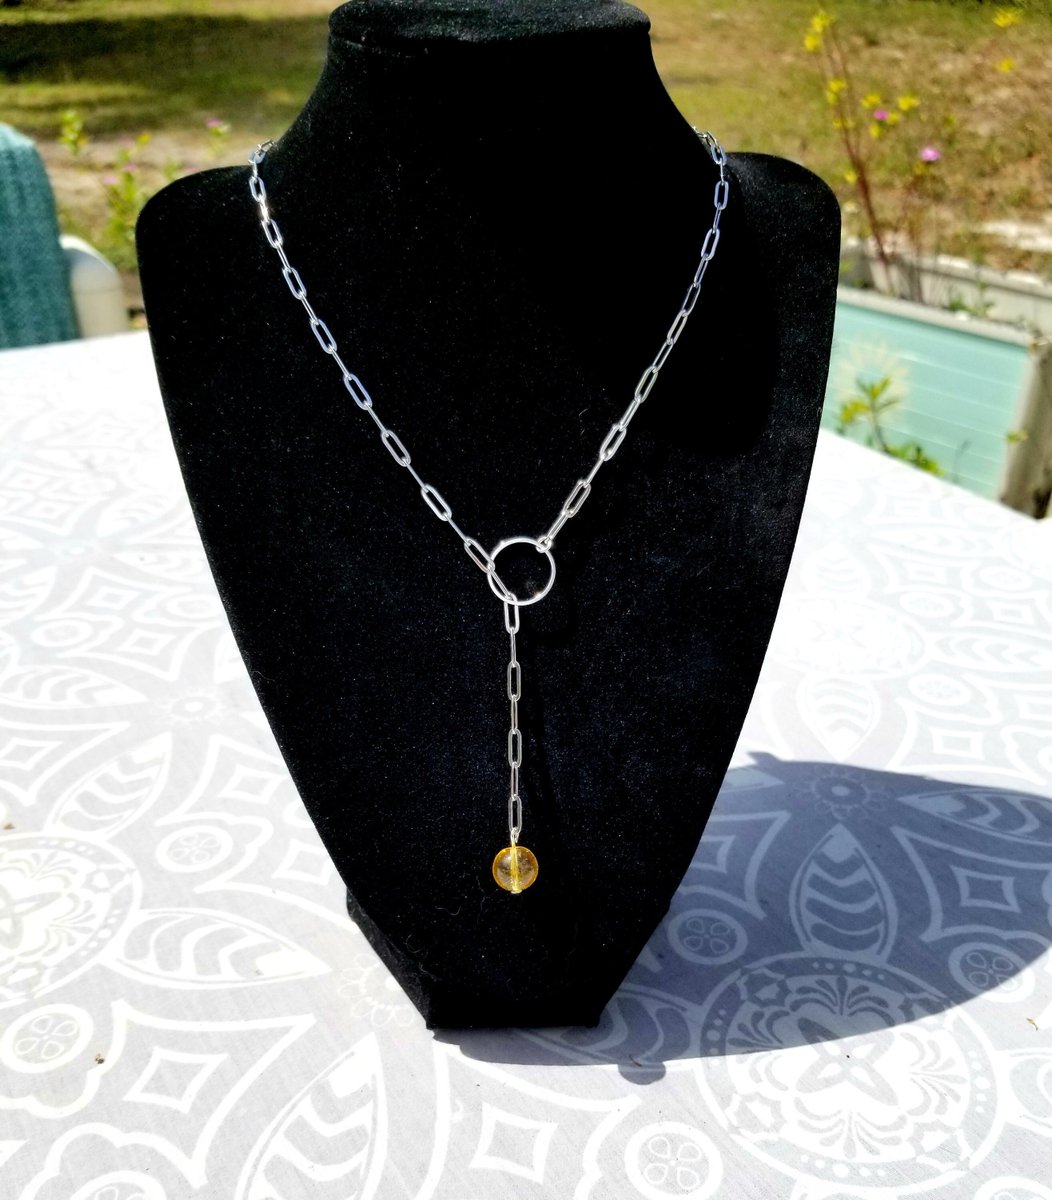 Silver Paperclip Chain Lariat Necklace, Citrine Necklace #jewelry #lariat #lariatnecklace #paperclipchain #paperclipchainnecklace #necklaces #handmadejewelry #giftsforher #giftsformom #wifegift #Mothersdaygift #citrine #citrinenecklace #etsy 

etsy.me/3wq4cCs via @Etsy